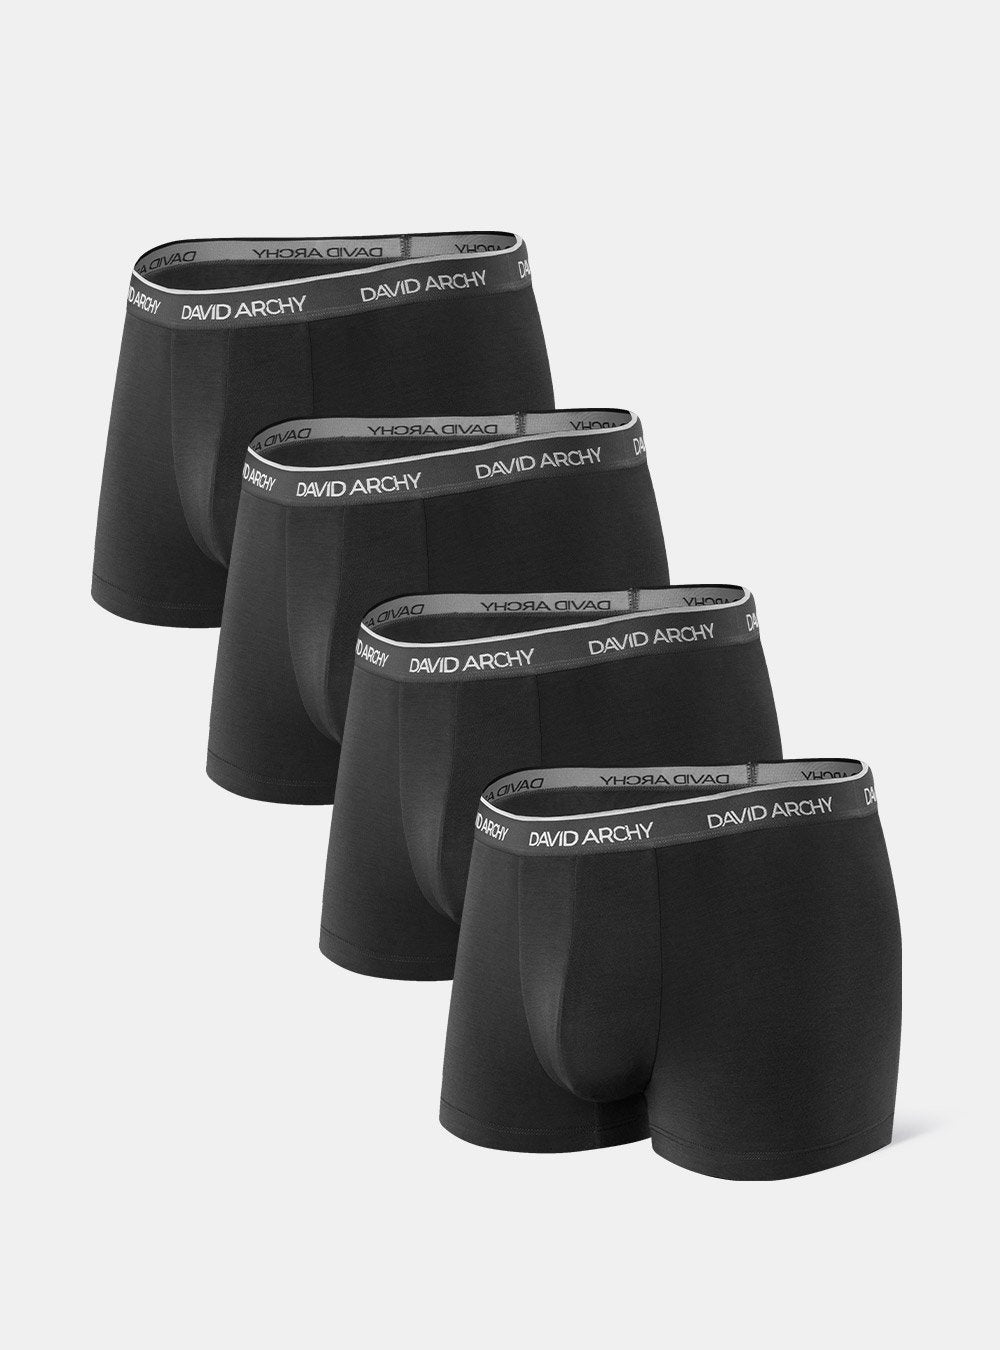 David Archy 4 Packs Bamboo Trunks With Dual Pouch Ultra Soft